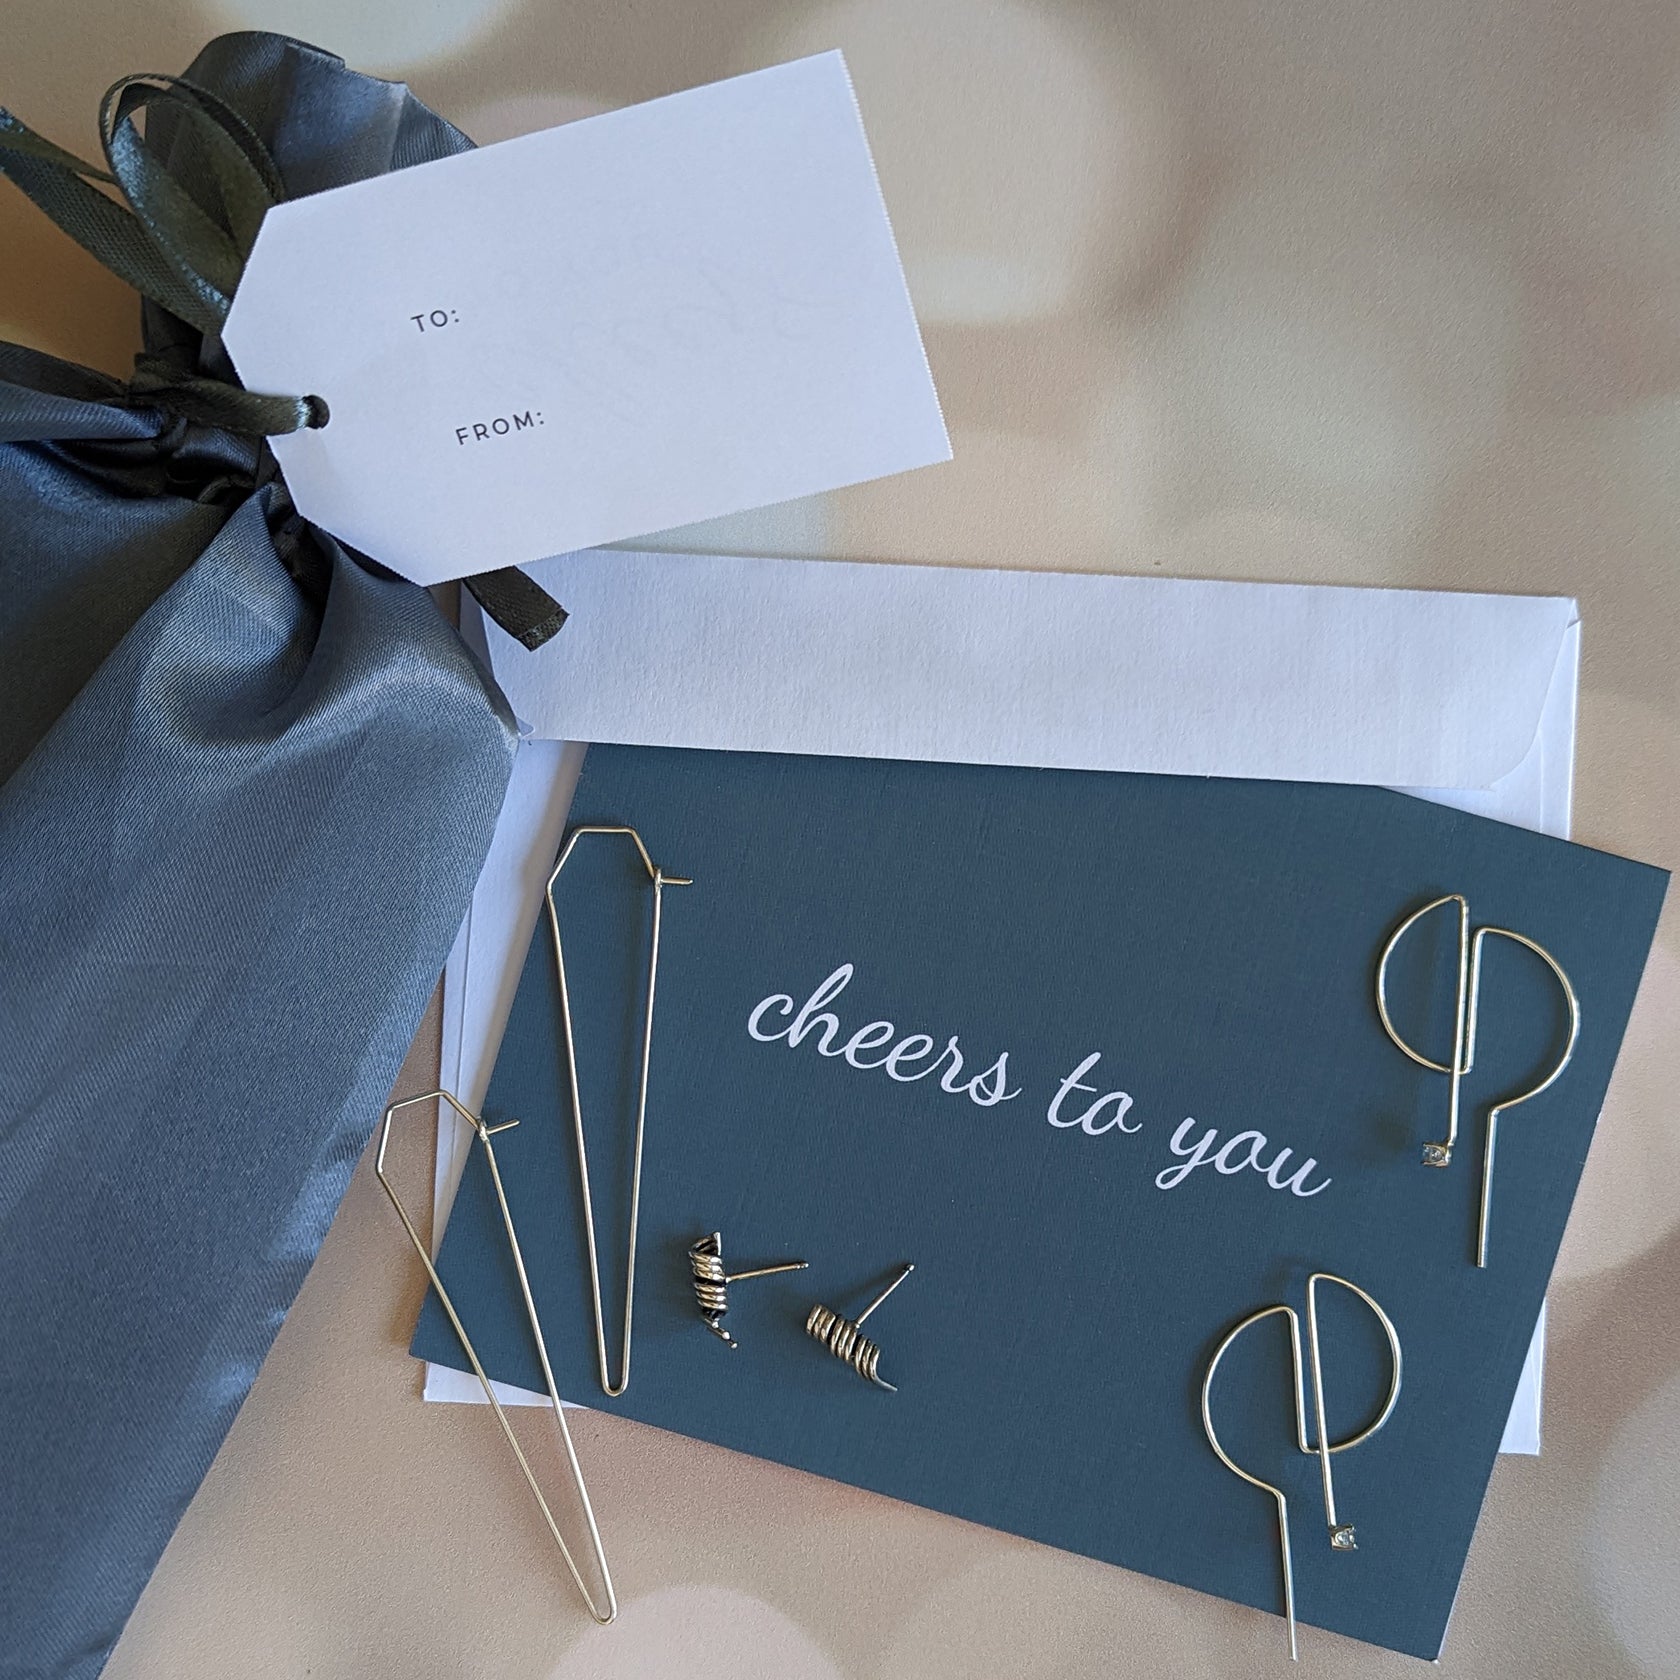 Branded jewelry gift wrapping for special occasion by Cindy Liebel Jewelry